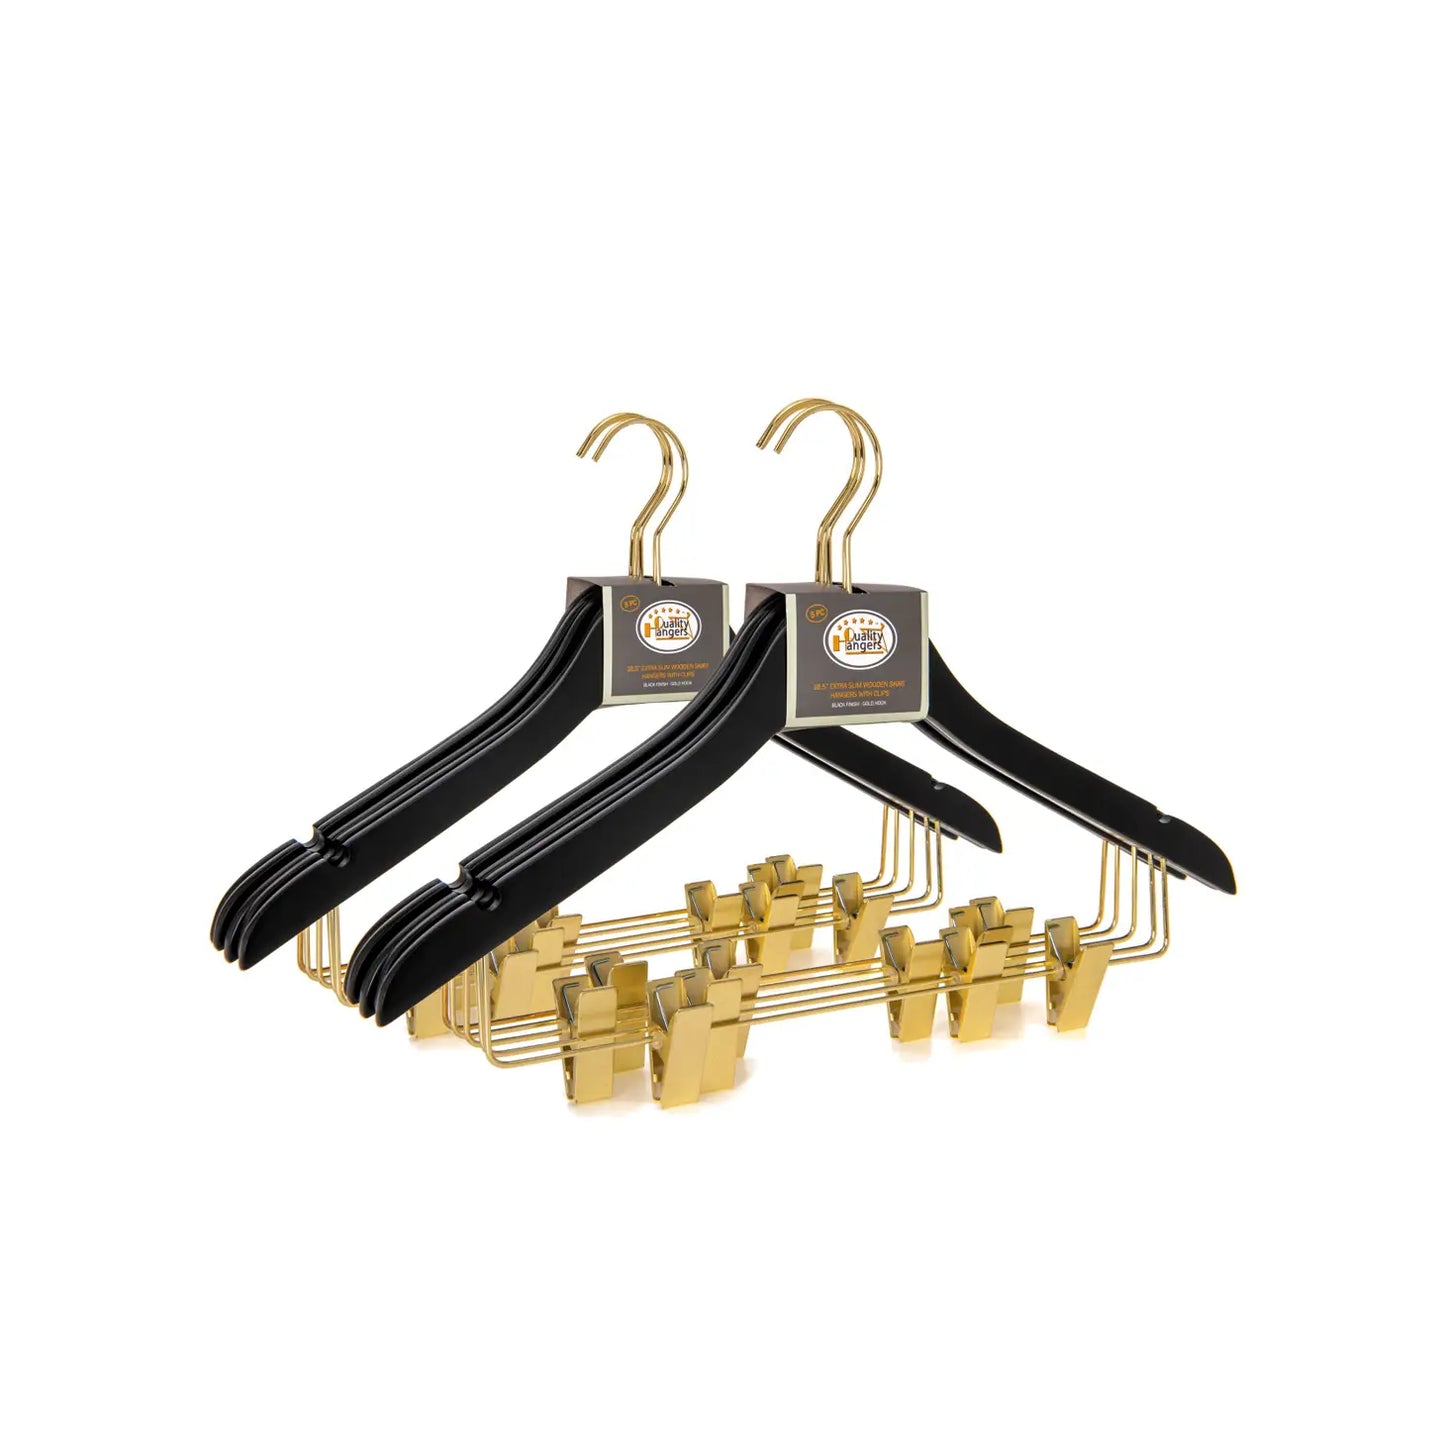 Ultra Slim Black Wooden Skirt Pant Hangers + Clips with Notches and Gold Hardware - Pack of 5 Hangers